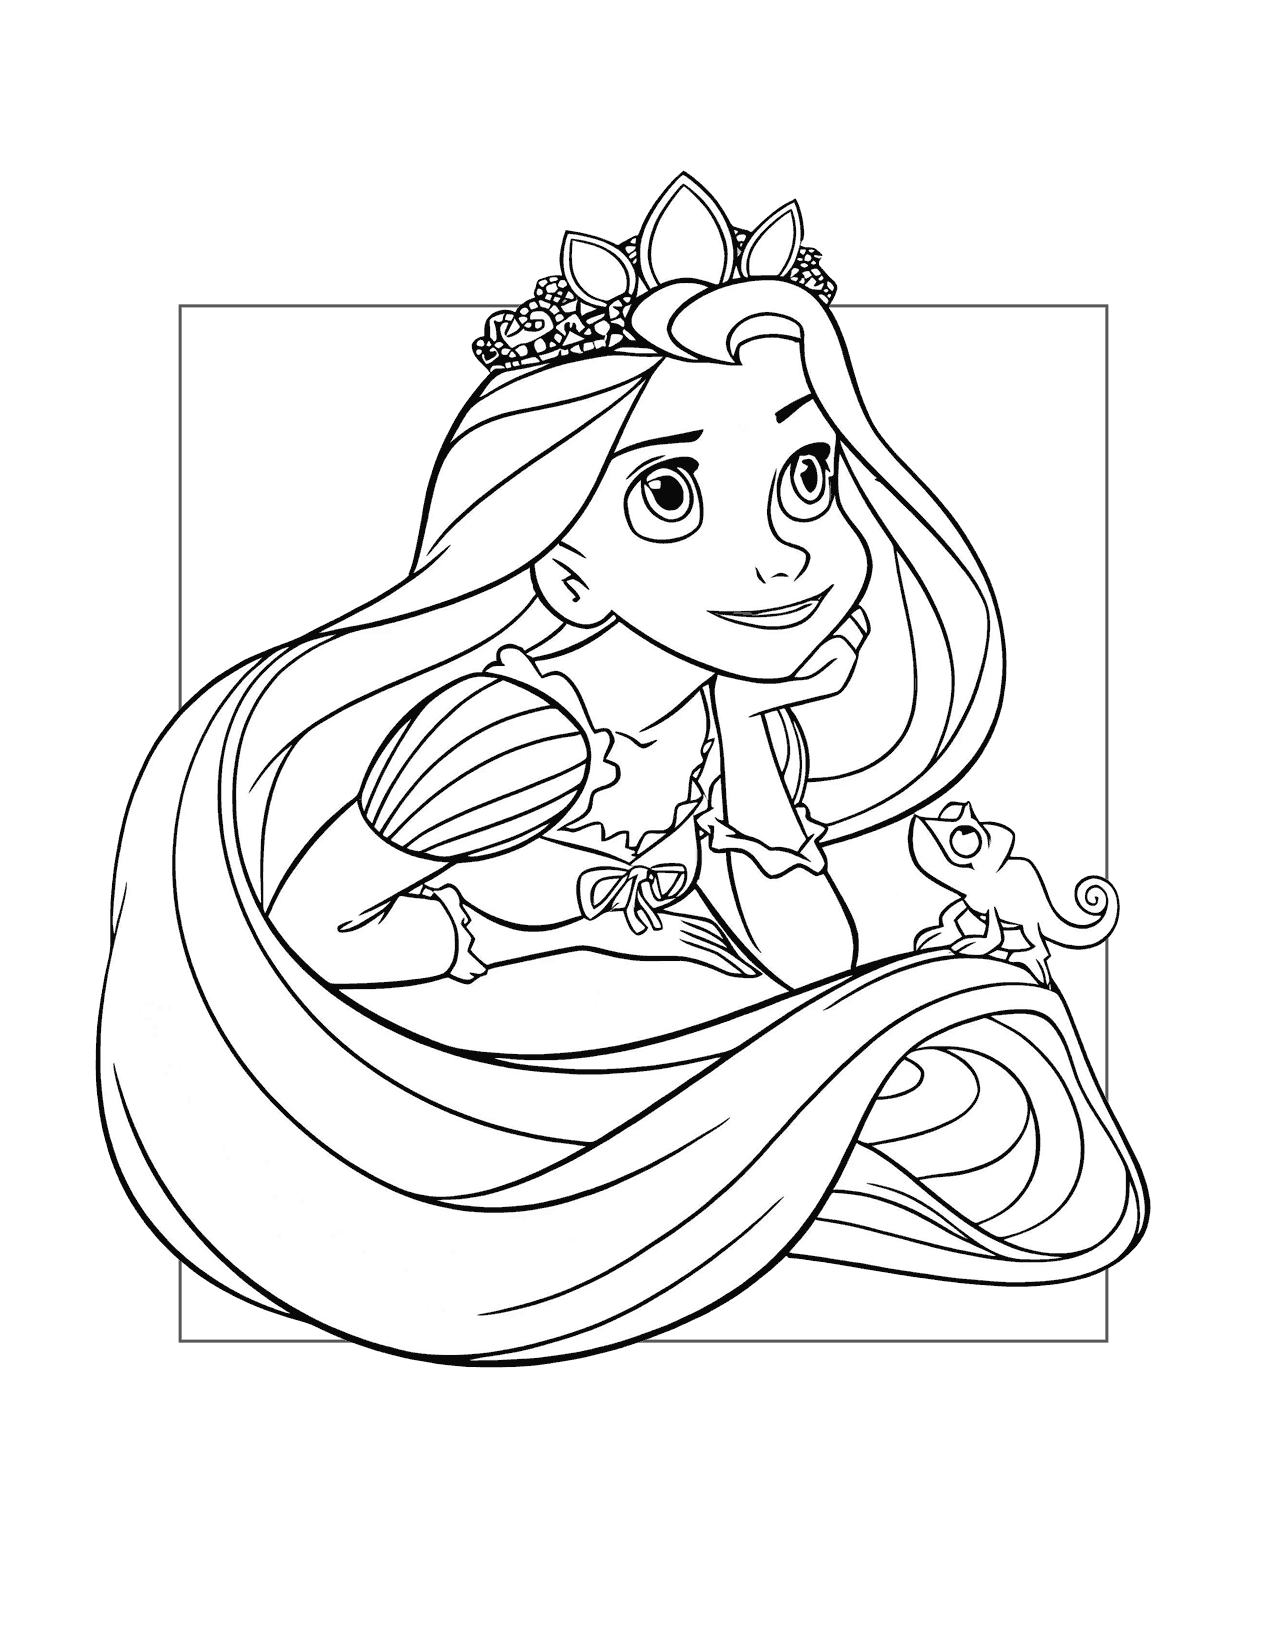 Rapunzel Is Daydreaming Coloring Page